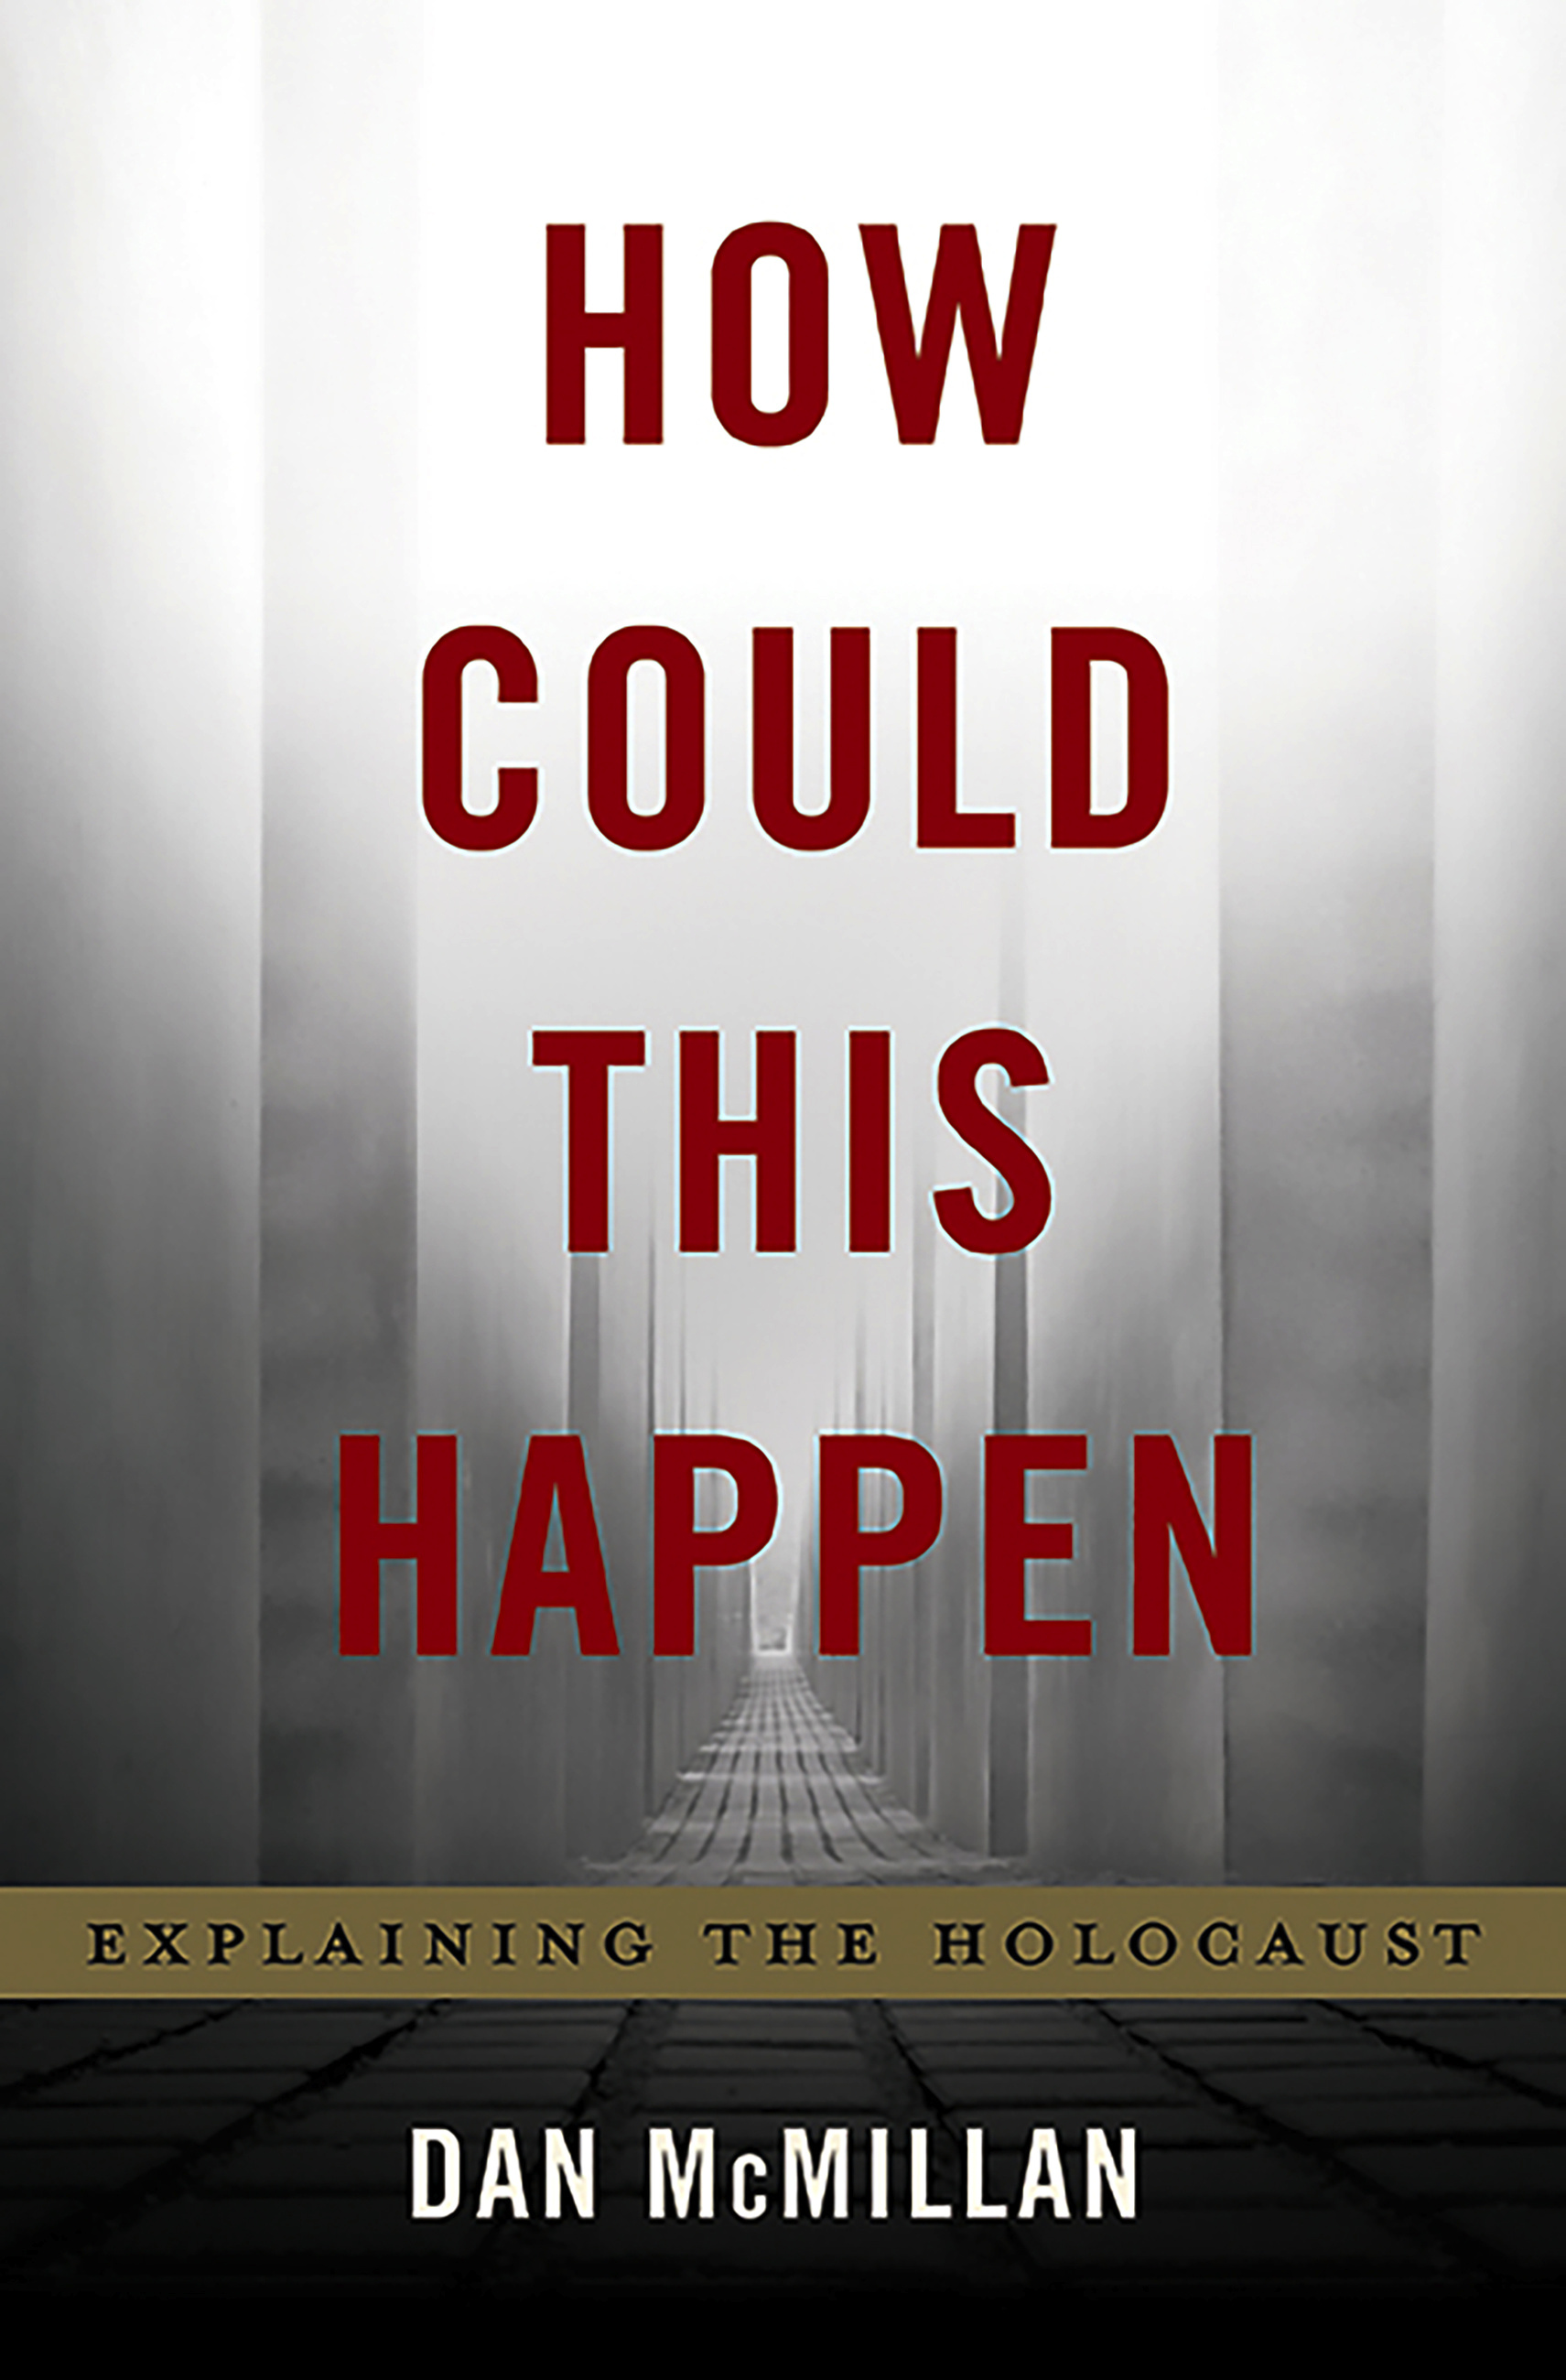 How Could This Happen by Dan McMillan | Basic Books